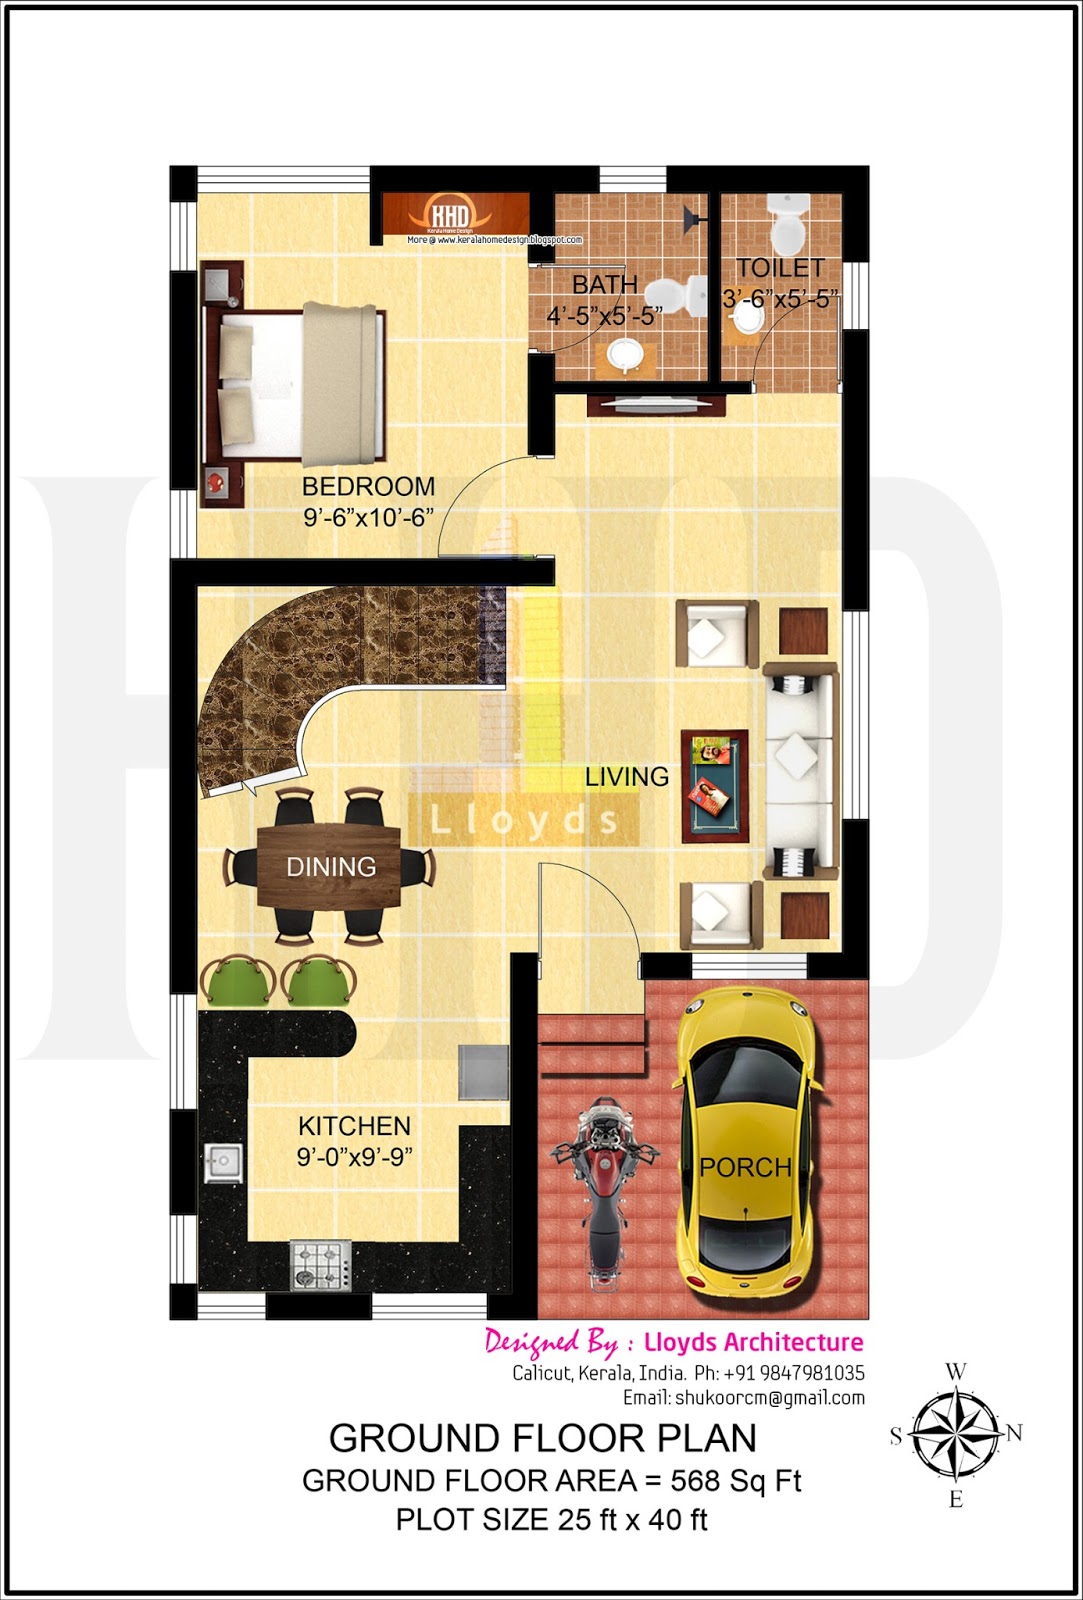  4  bedroom  house  plan  in less that 3 cents  Home  Kerala Plans 